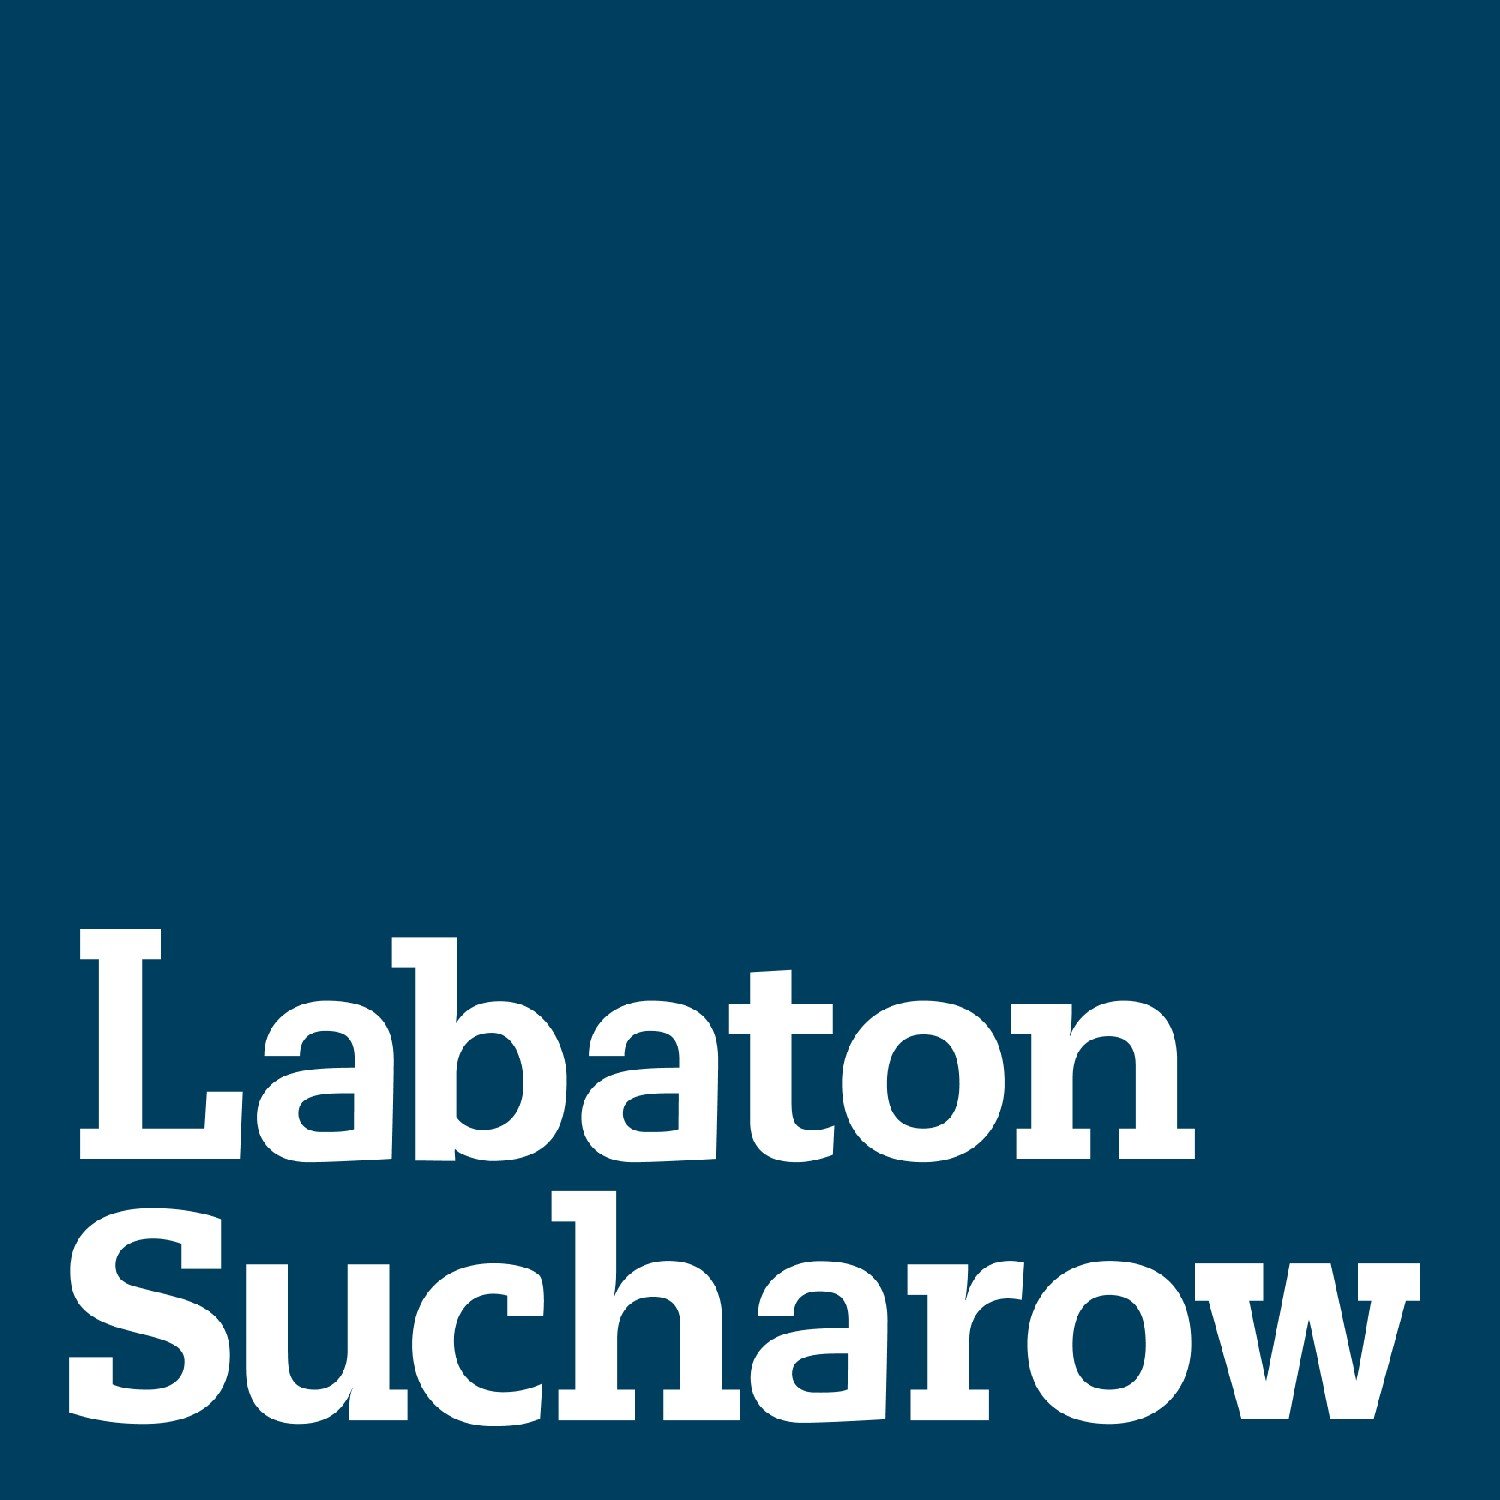 Labaton Sucharow LLP, Tuesday, July 20, 2021, Press release picture